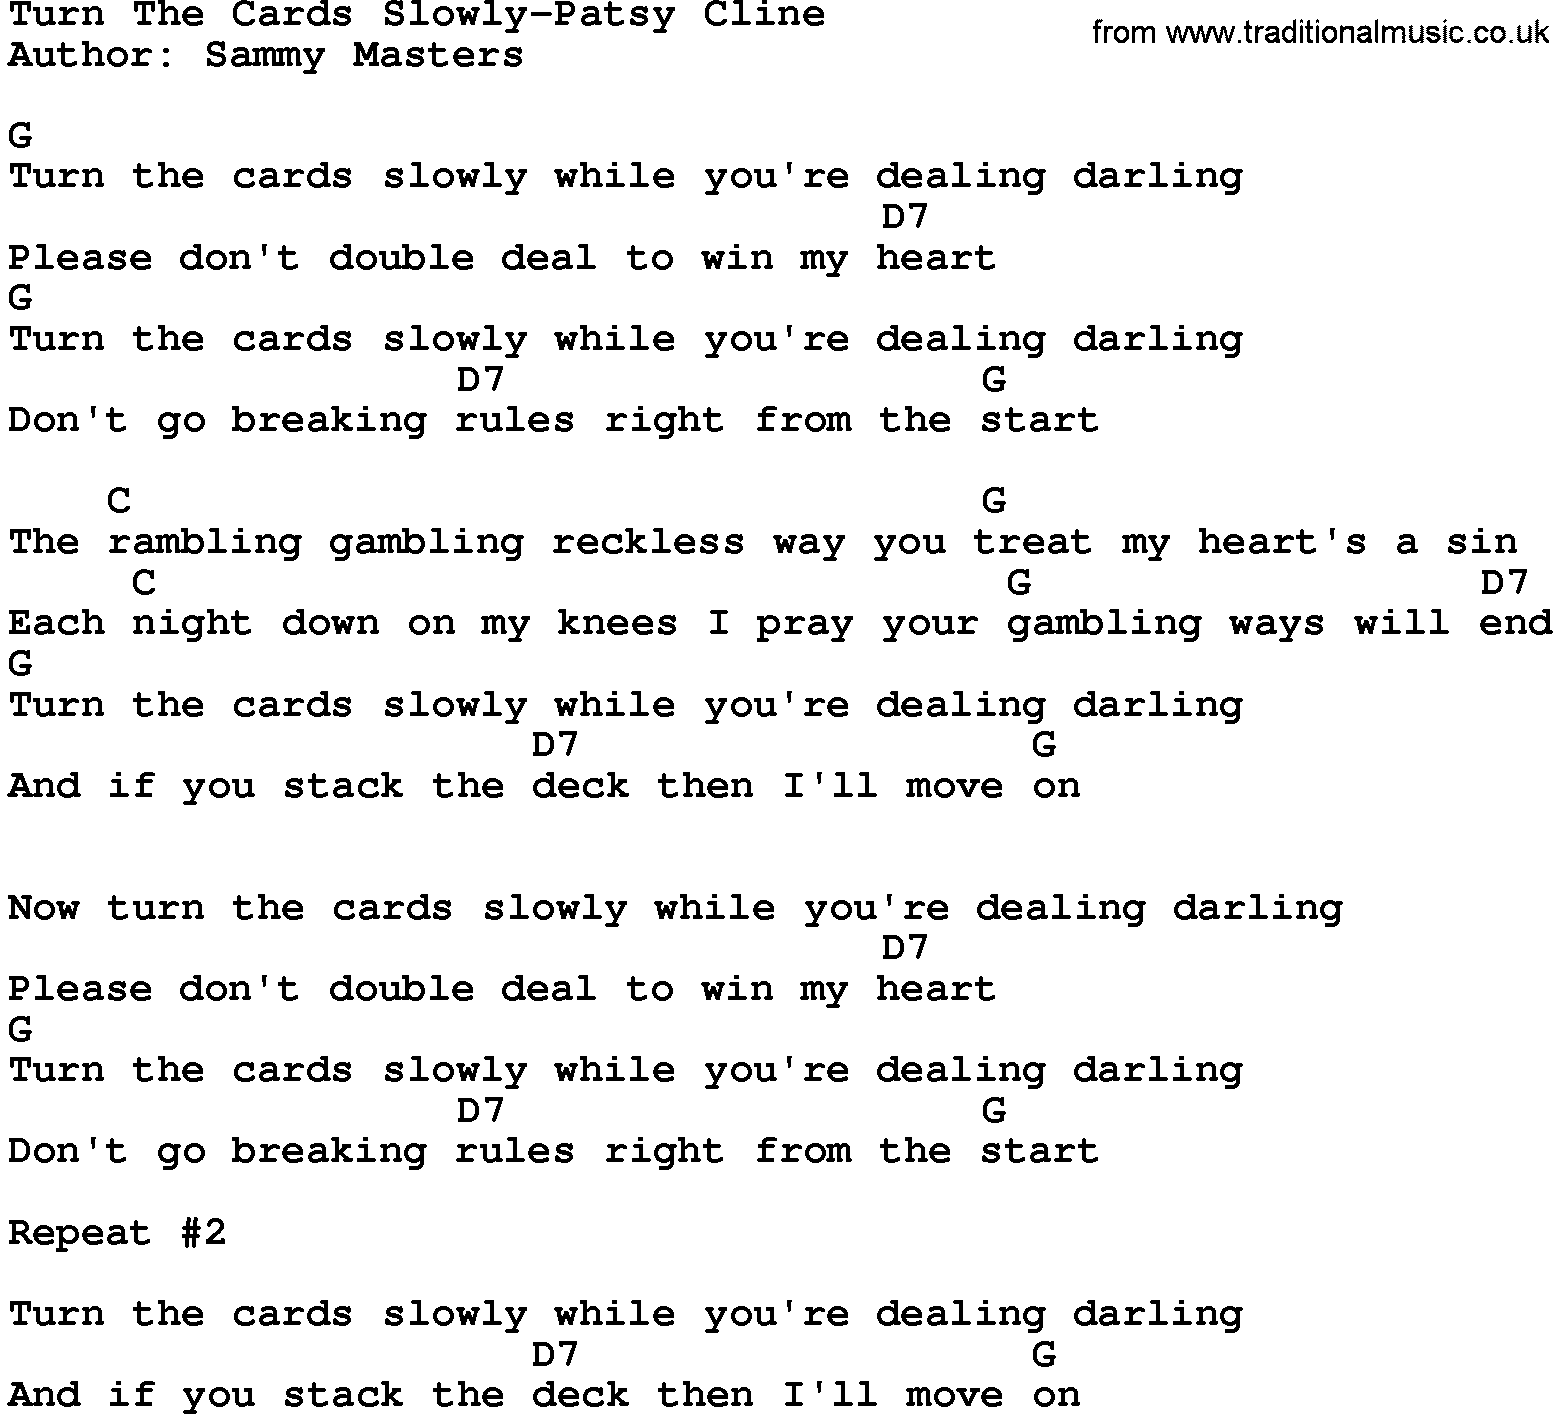 Country music song: Turn The Cards Slowly-Patsy Cline lyrics and chords